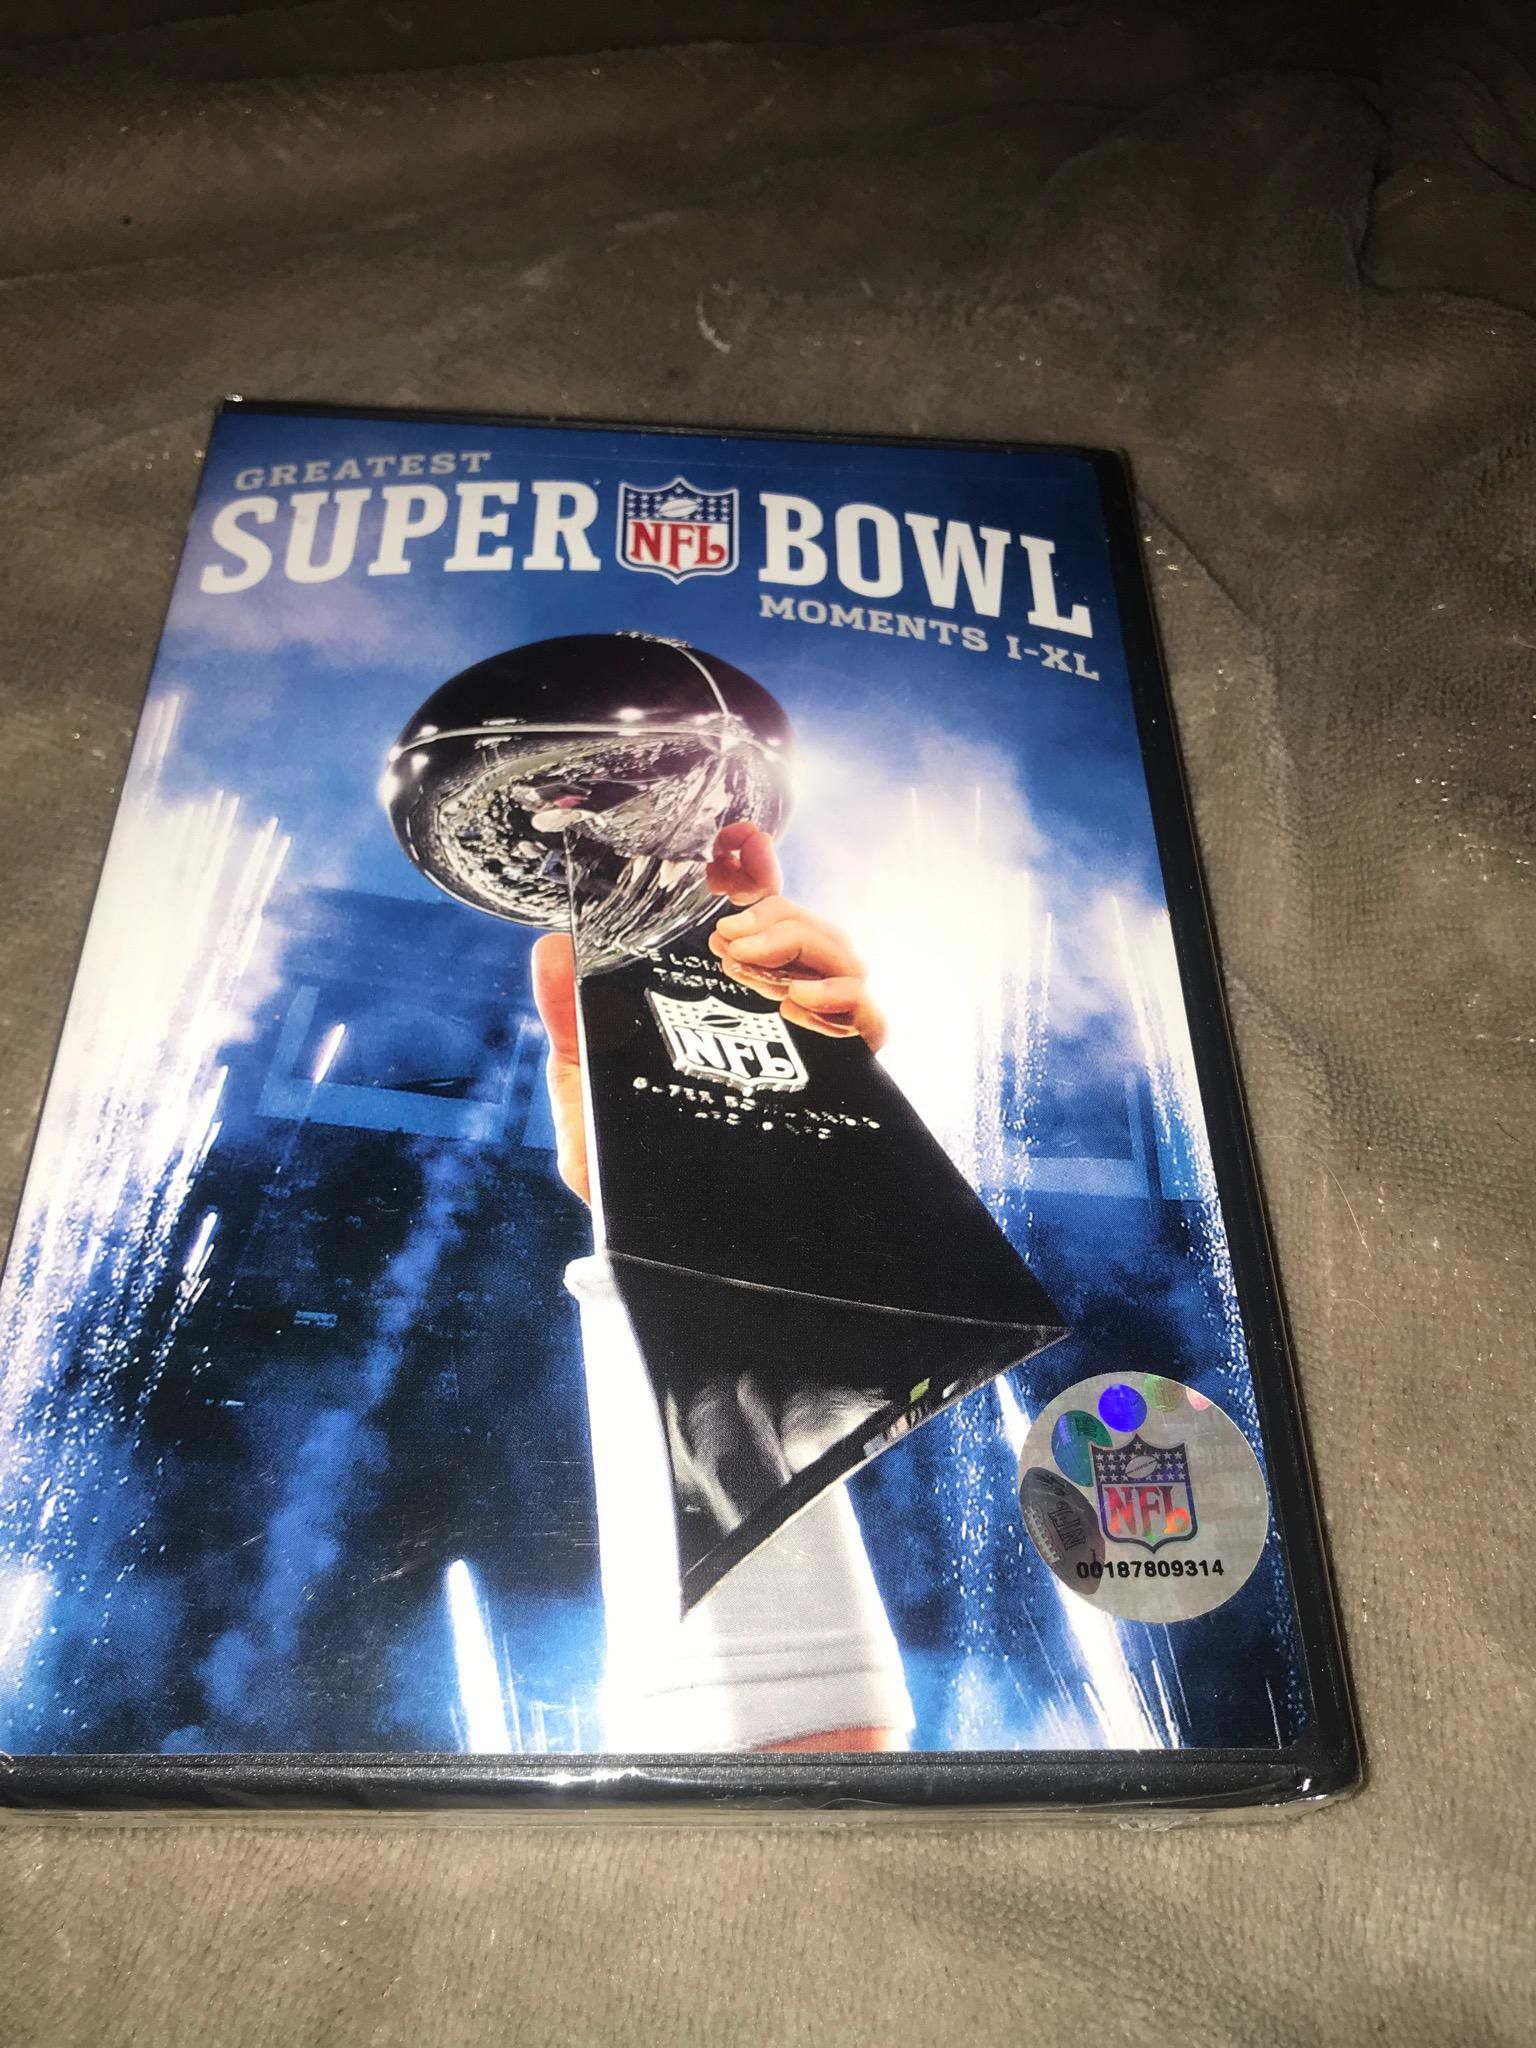 Christmas is coming Brand new dvd greatest Super Bowl moments Retails $27.99 Grab it for just $4!!! Ships for $3 more